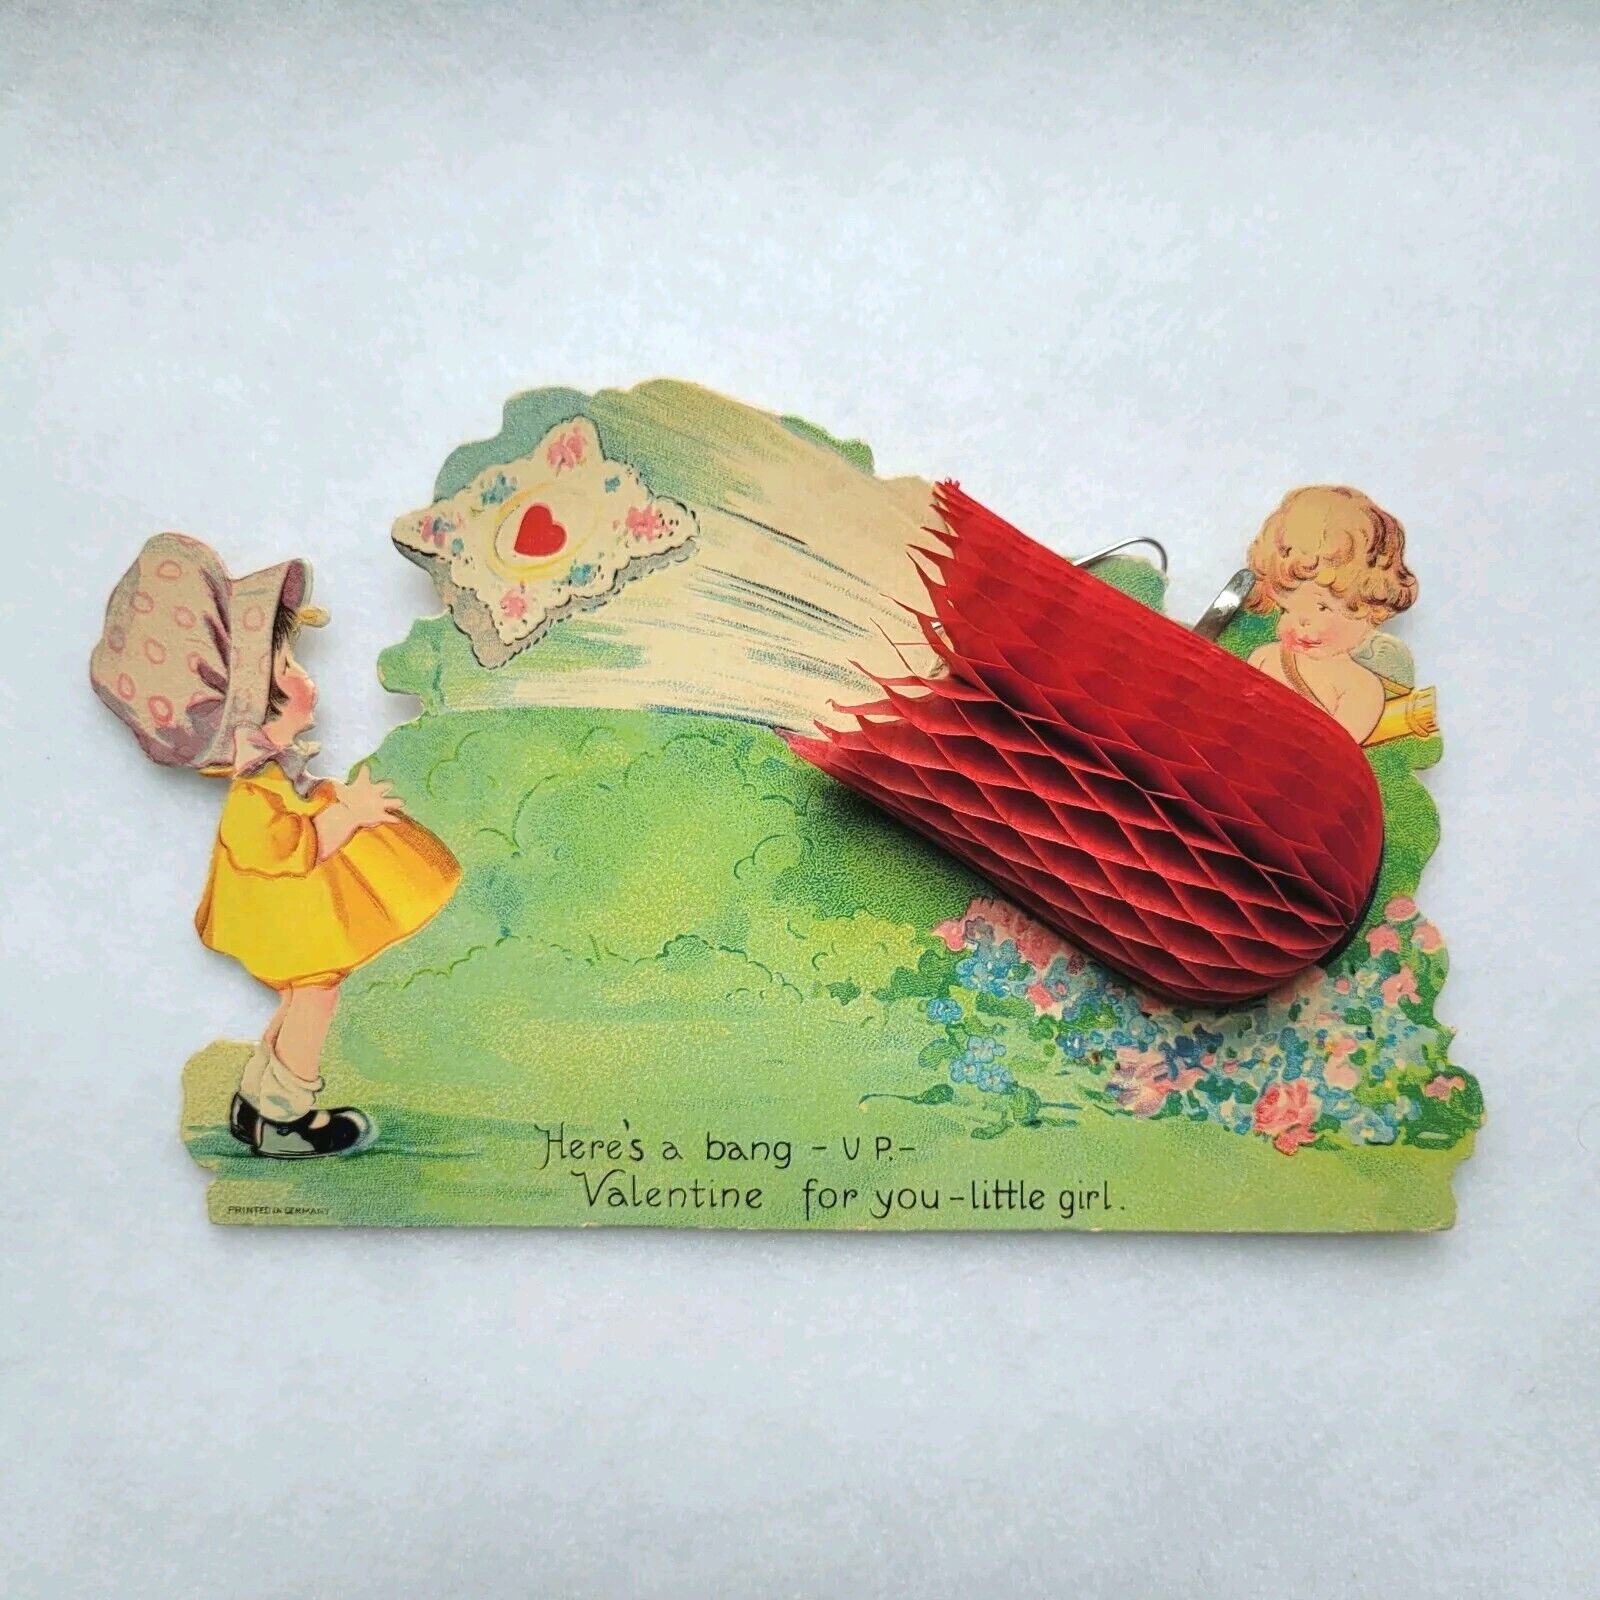 Vintage Honeycomb Pop-up Valentine Card 1920\'s Girl Cupid Cannon 8x4.75 Germany 